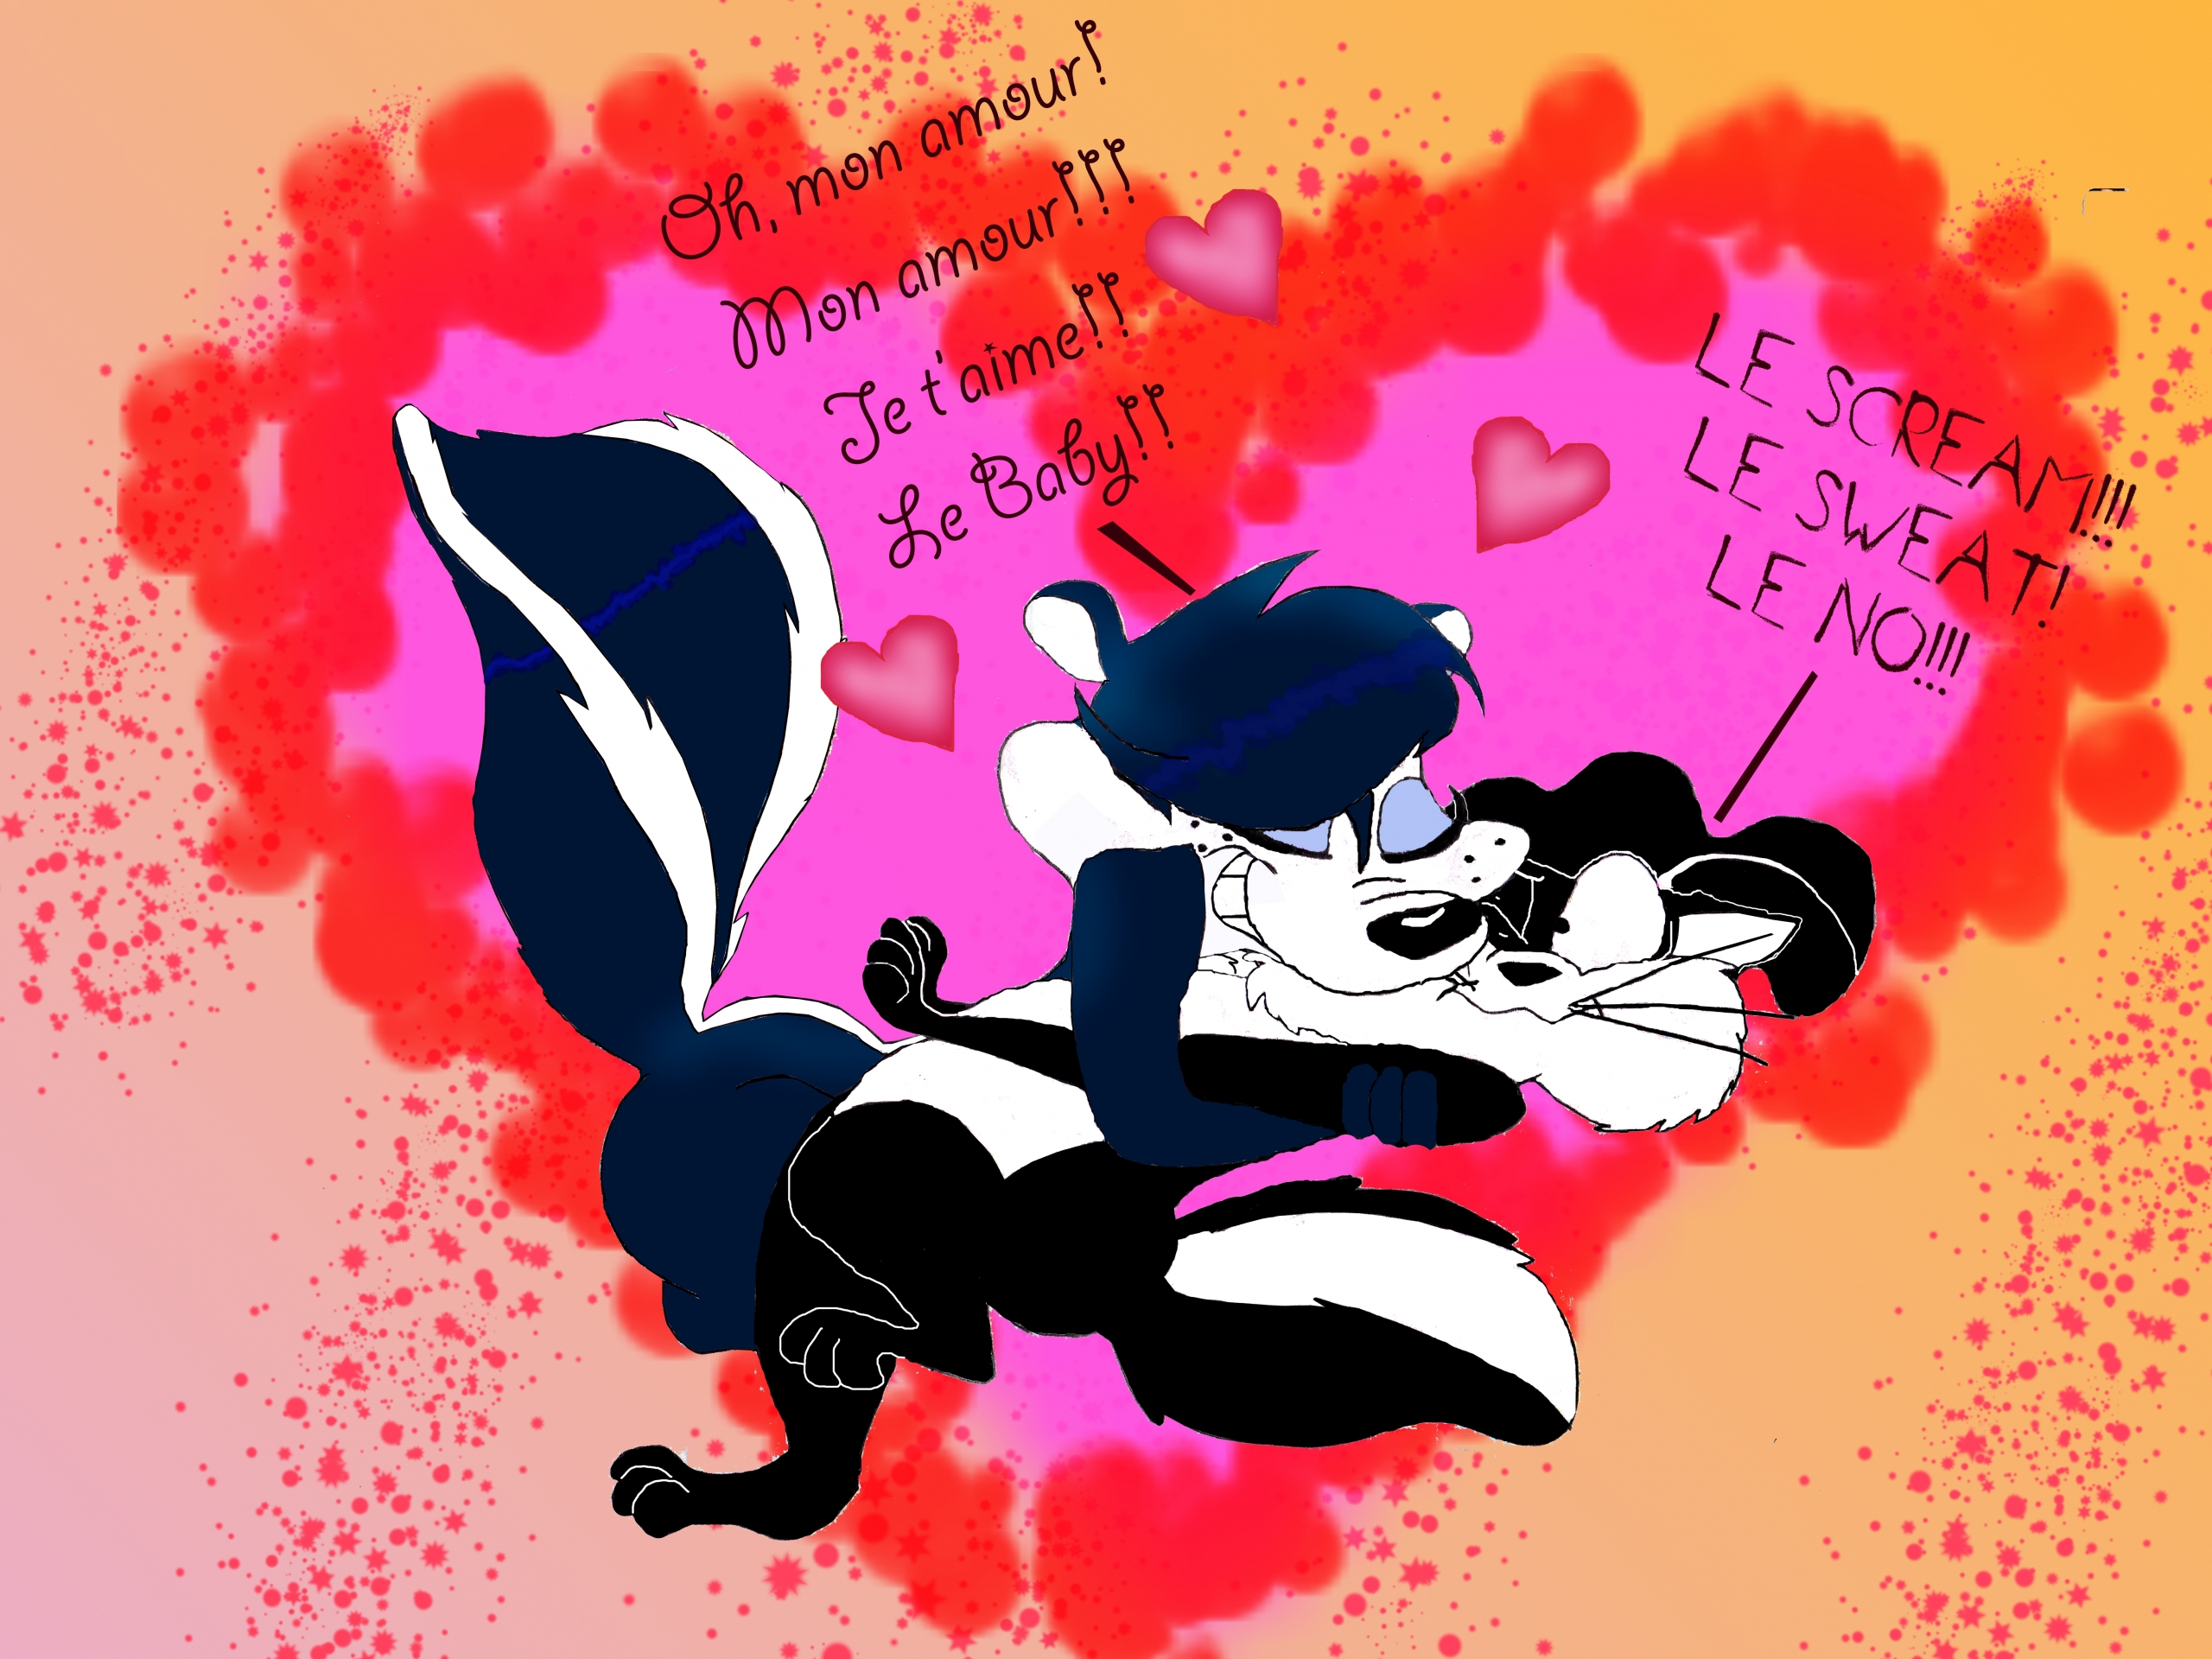 PEPE LE PEW looney tunes wallpaper 2560x1920 161030 WallpaperUP 2560x1920